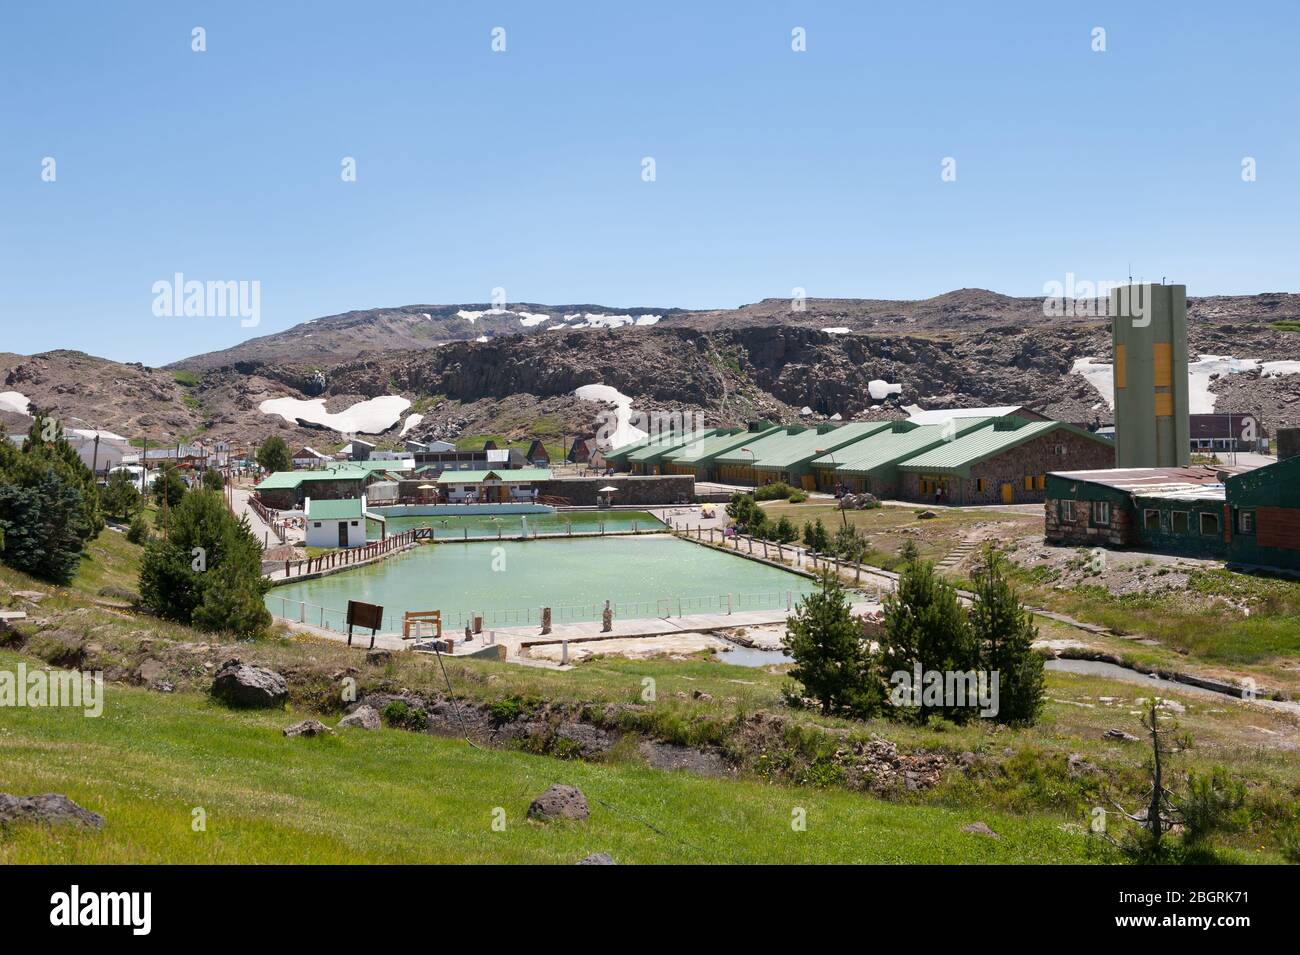 Copahue, Argentina - March 03 2020: View of the thermal complex with hot springs in Copahue, province of Neuquen Stock Photo